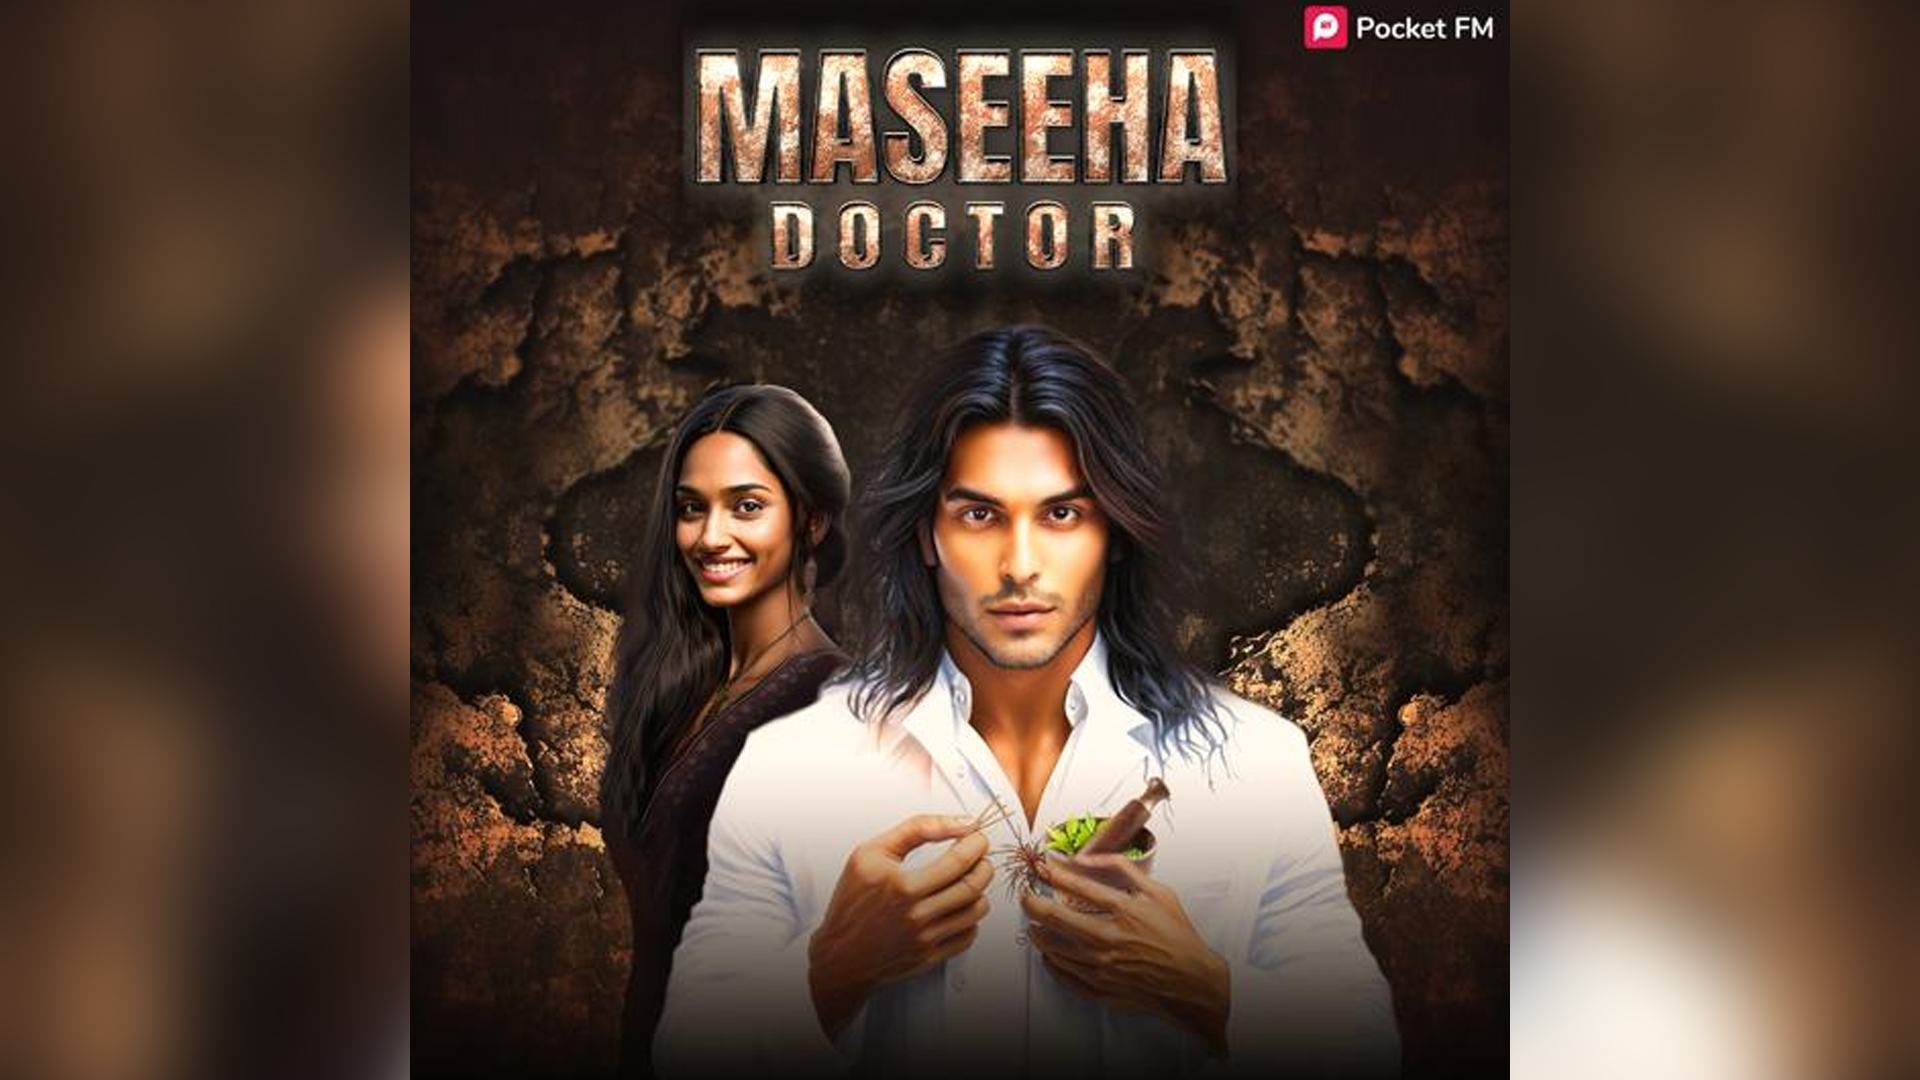 Review of Pocket FM’s audio series Maseeha Doctor: A Mystical Masterpiece that cannot be missed!